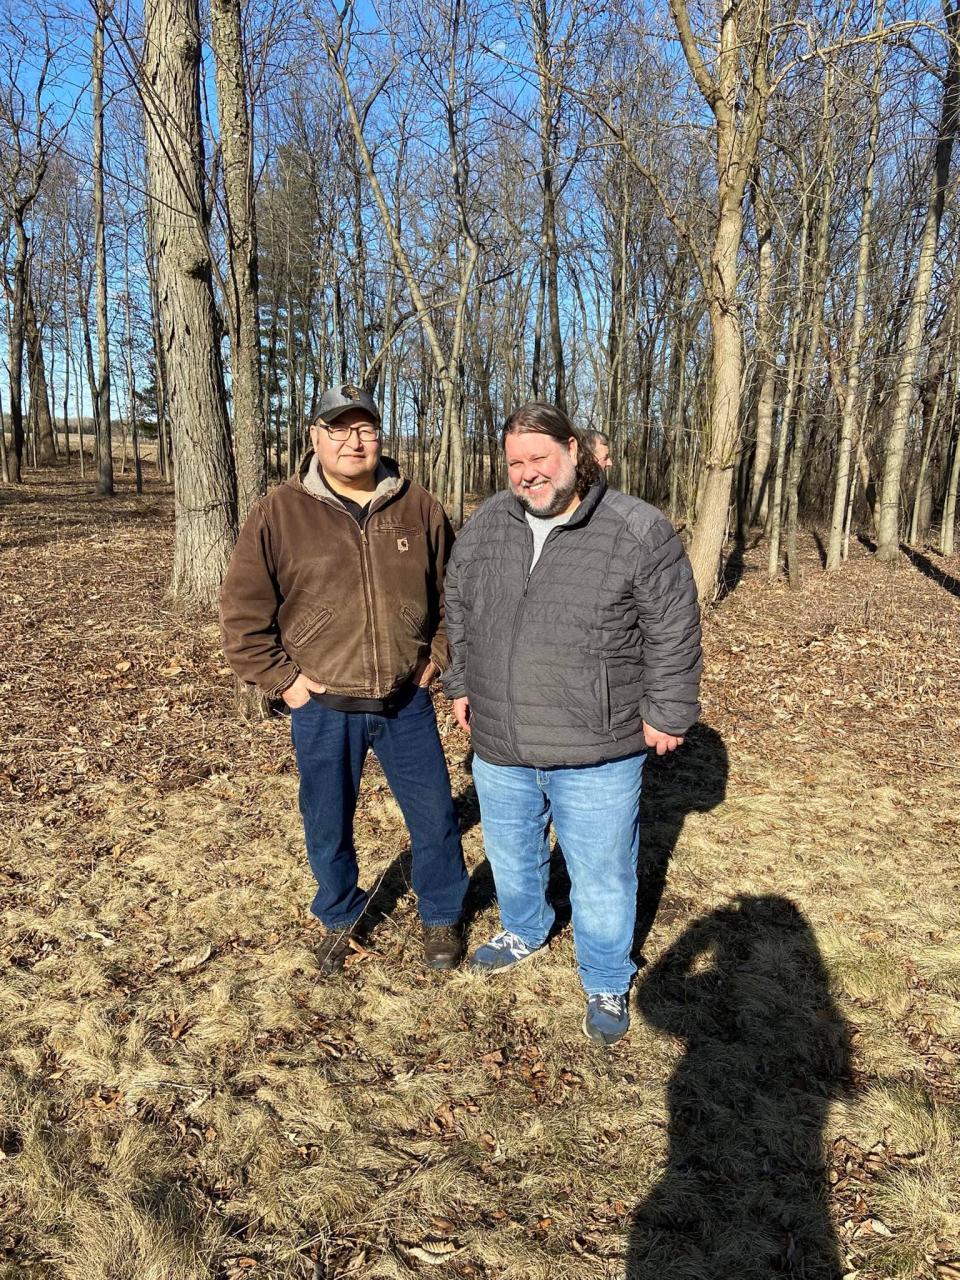 Archaeologist Kurt Sampson (right) and tribal historic preservation officer for the Ho-Chunk Nation Bill Quackenbush (left) stand at an ancient Indigenous mound site in Wisconsin.